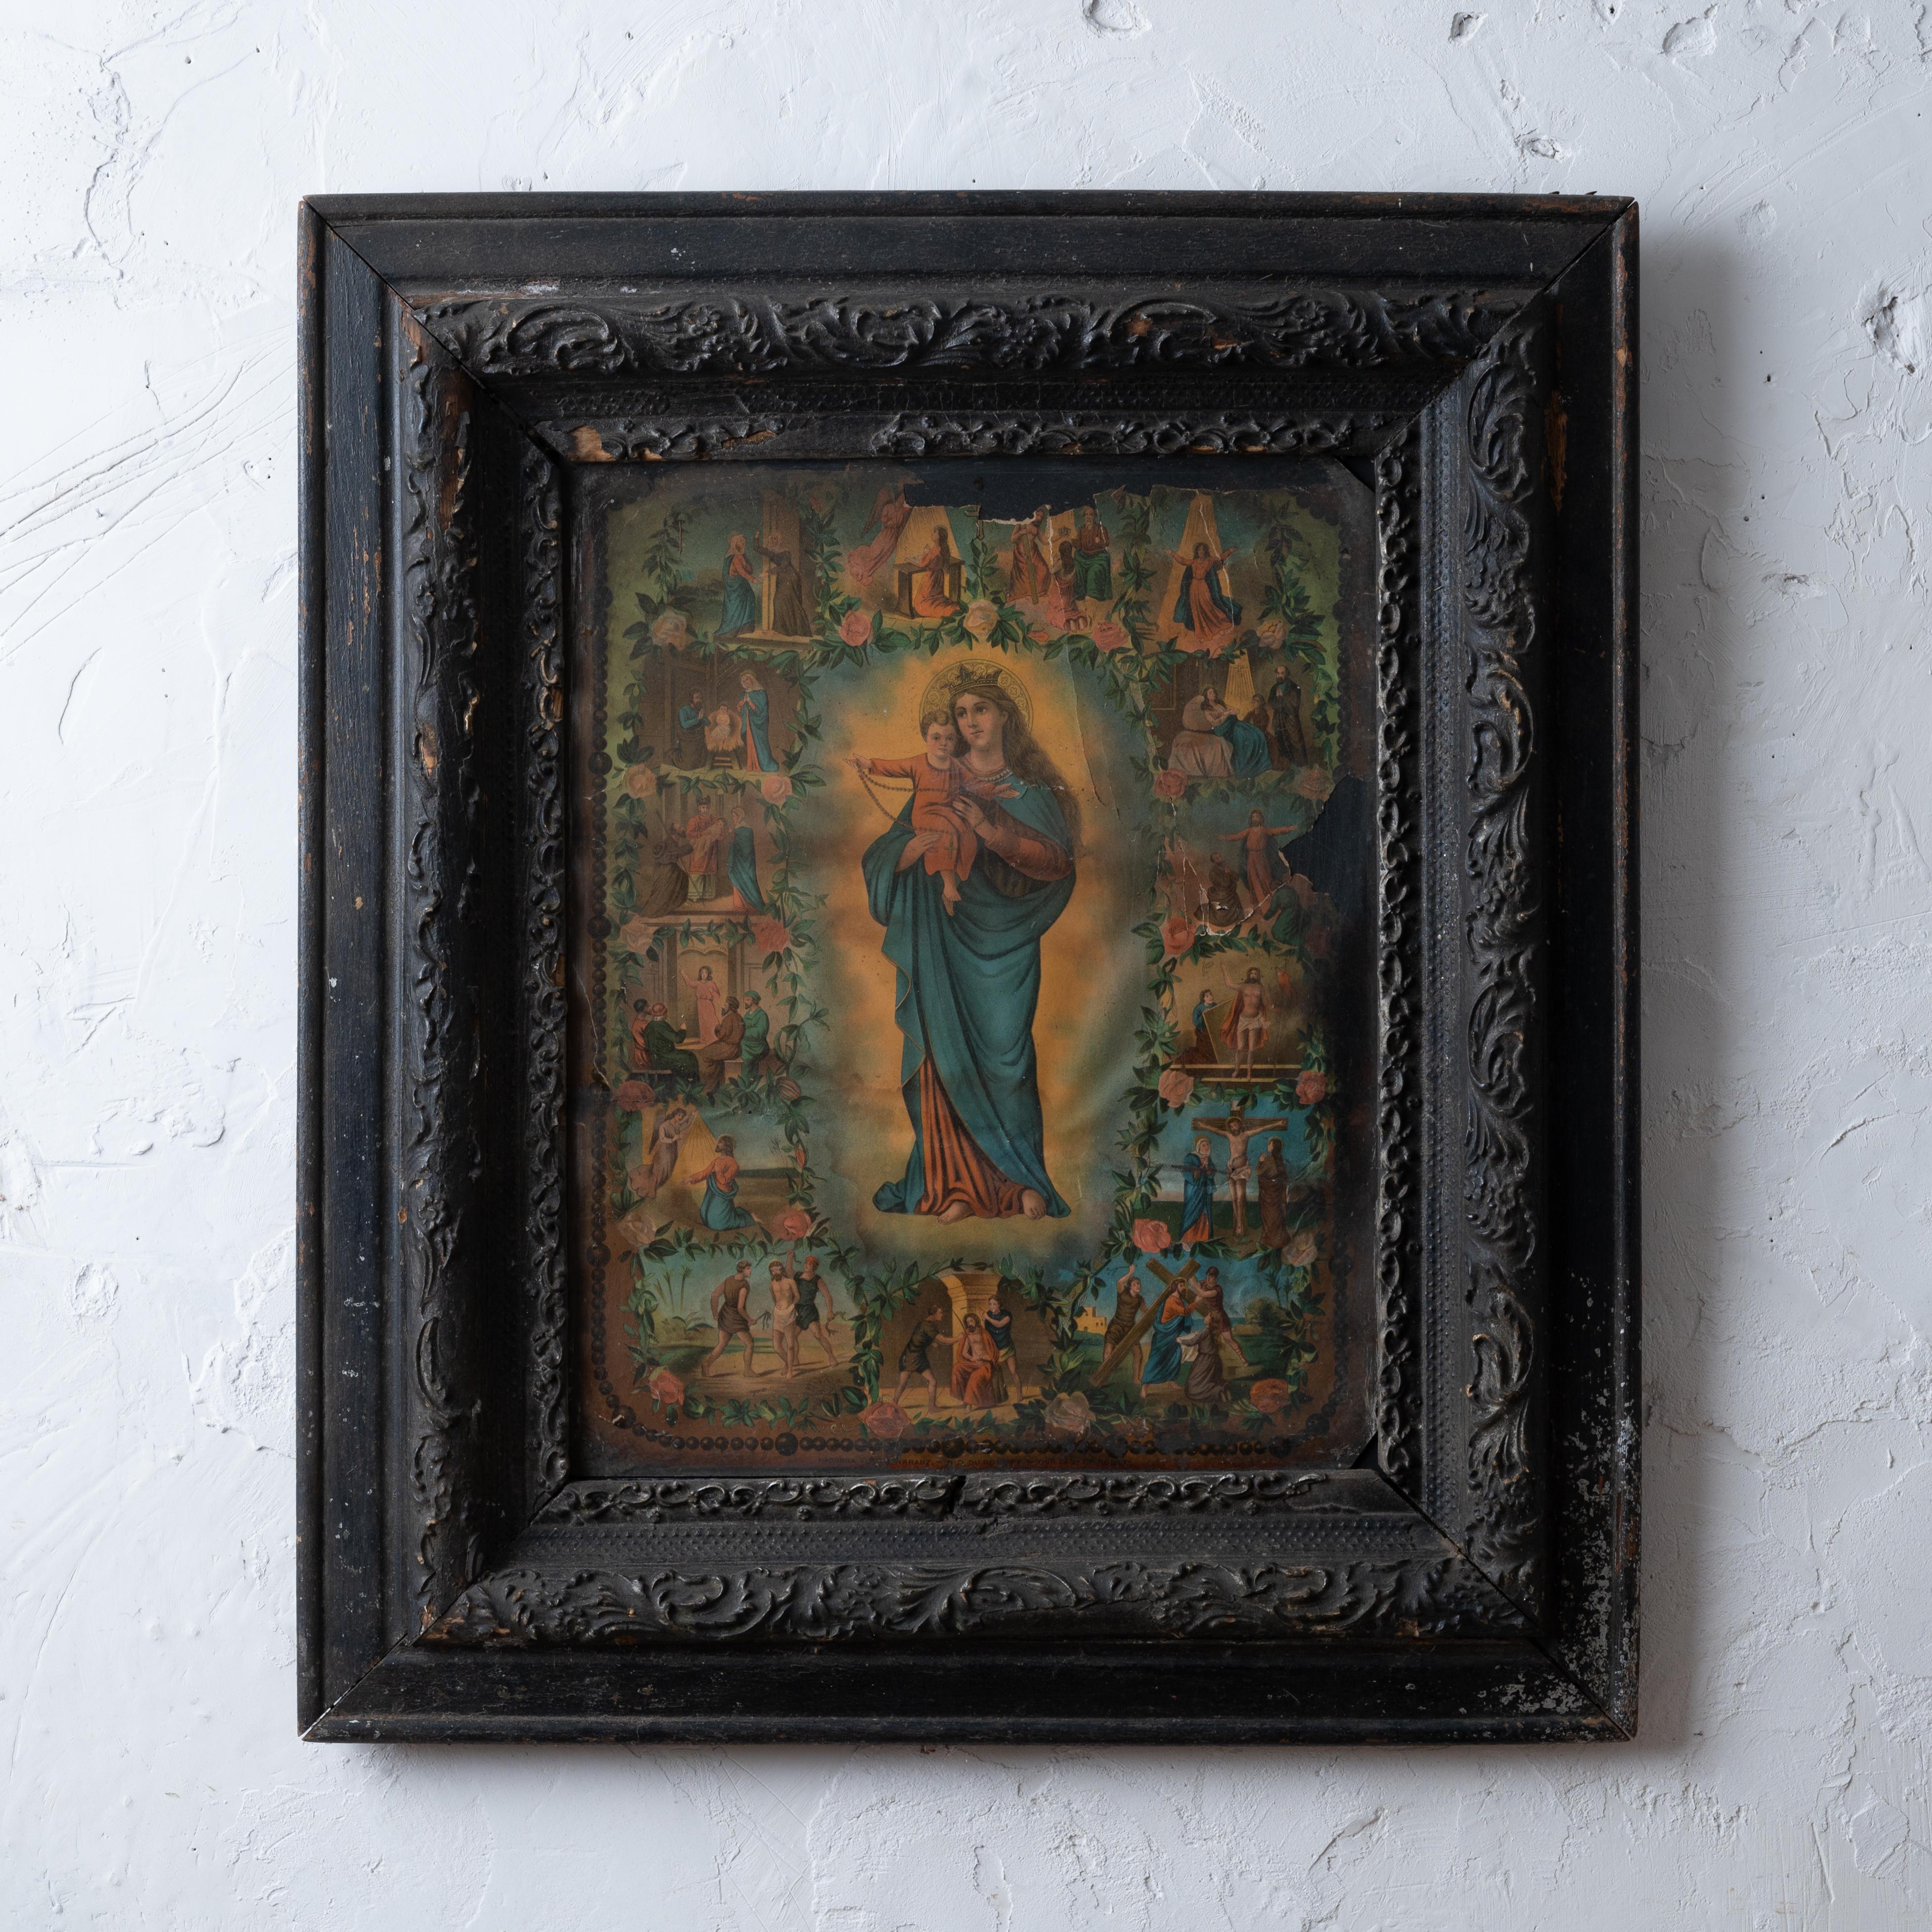 An Our Lady Of Rosary lithograph, Germany, circa 1890s.
A heavily distressed piece in period frame showing a history of devotion.  

sight: 15 ¾ by 19 ¾ inches
frame: 26 by 30 inches